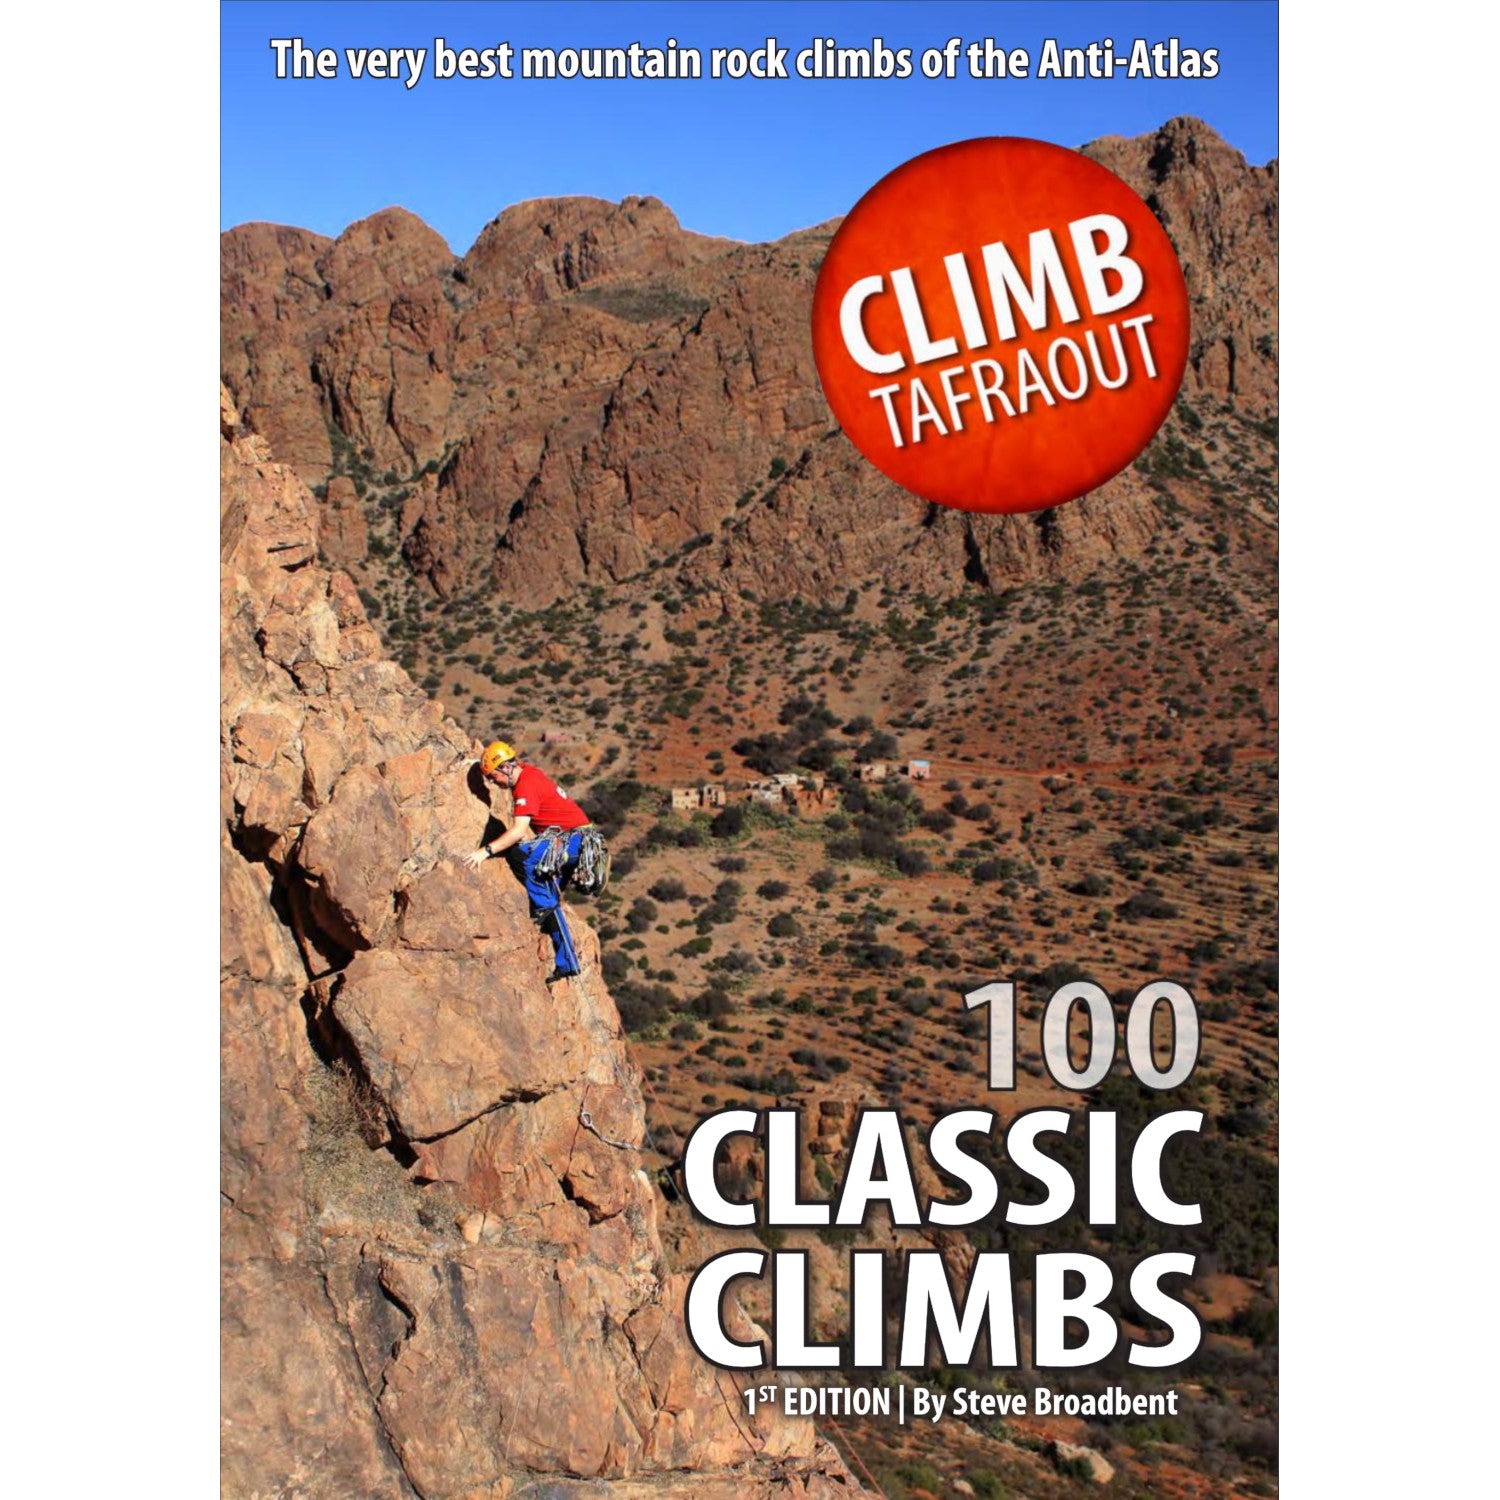 Climb Tafraout (100 Classic Climbs) climbing guidebook, showing the front cover